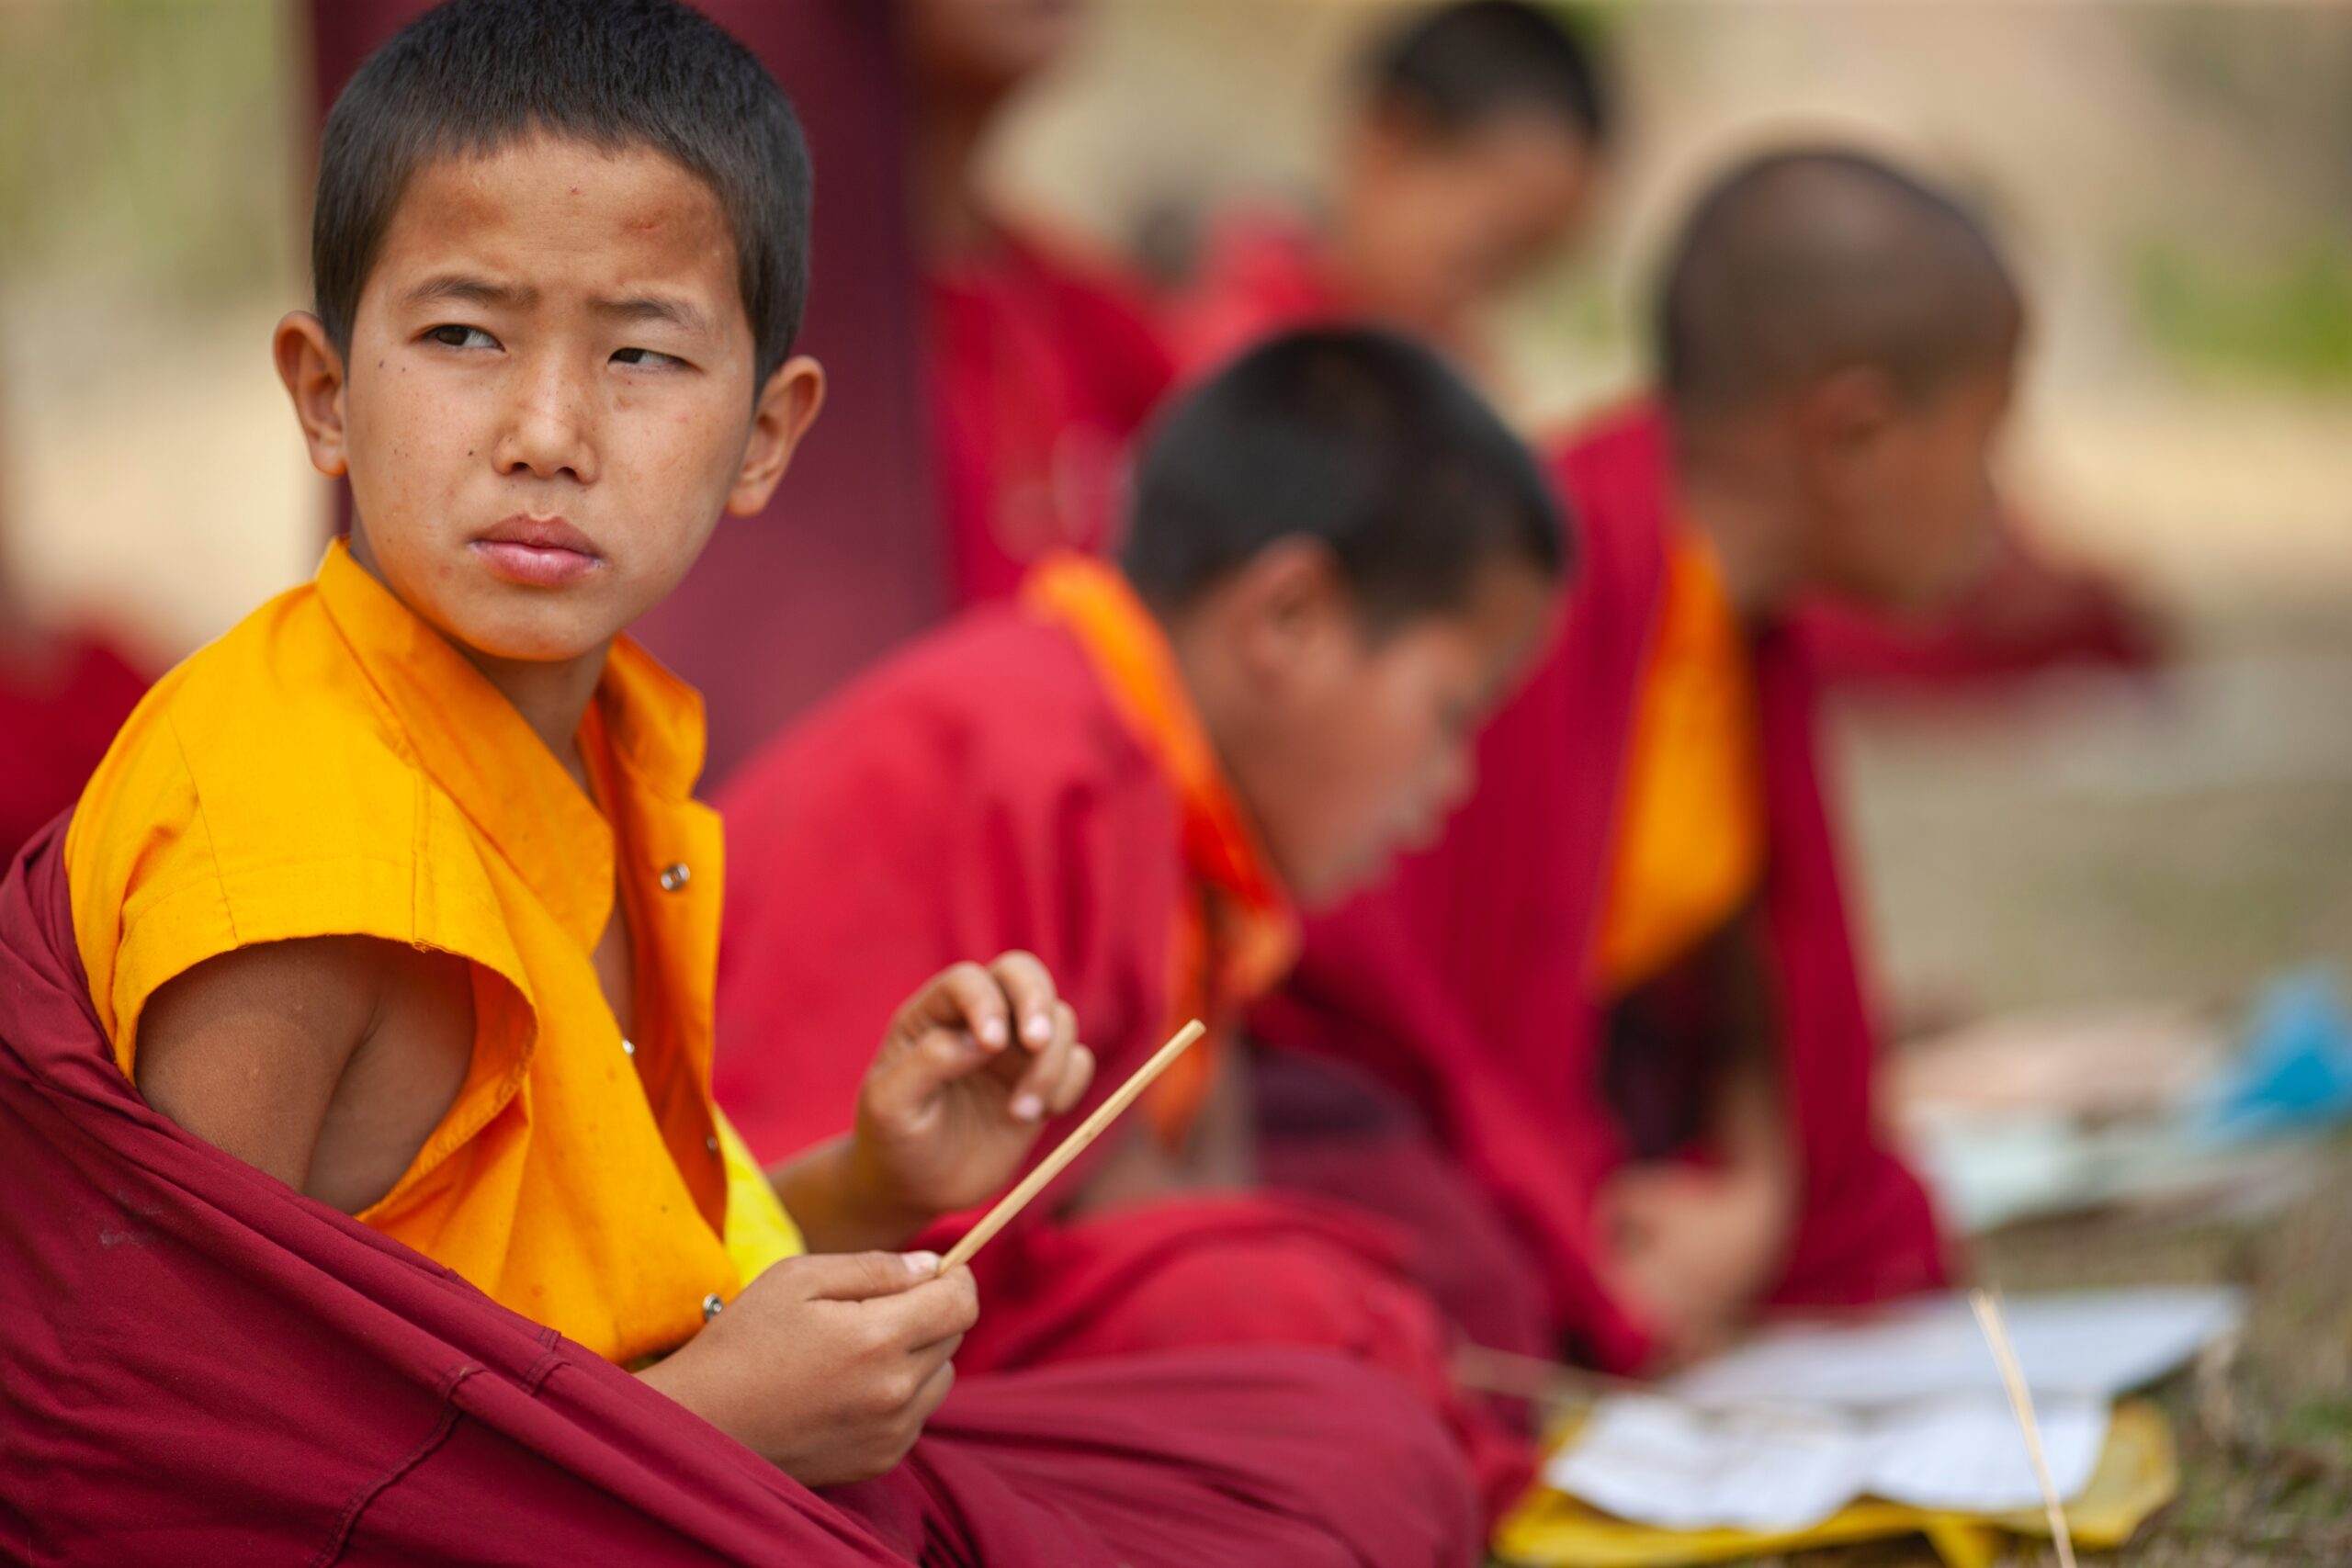 Digambara Monks, selective focus photography of boy sitting in round